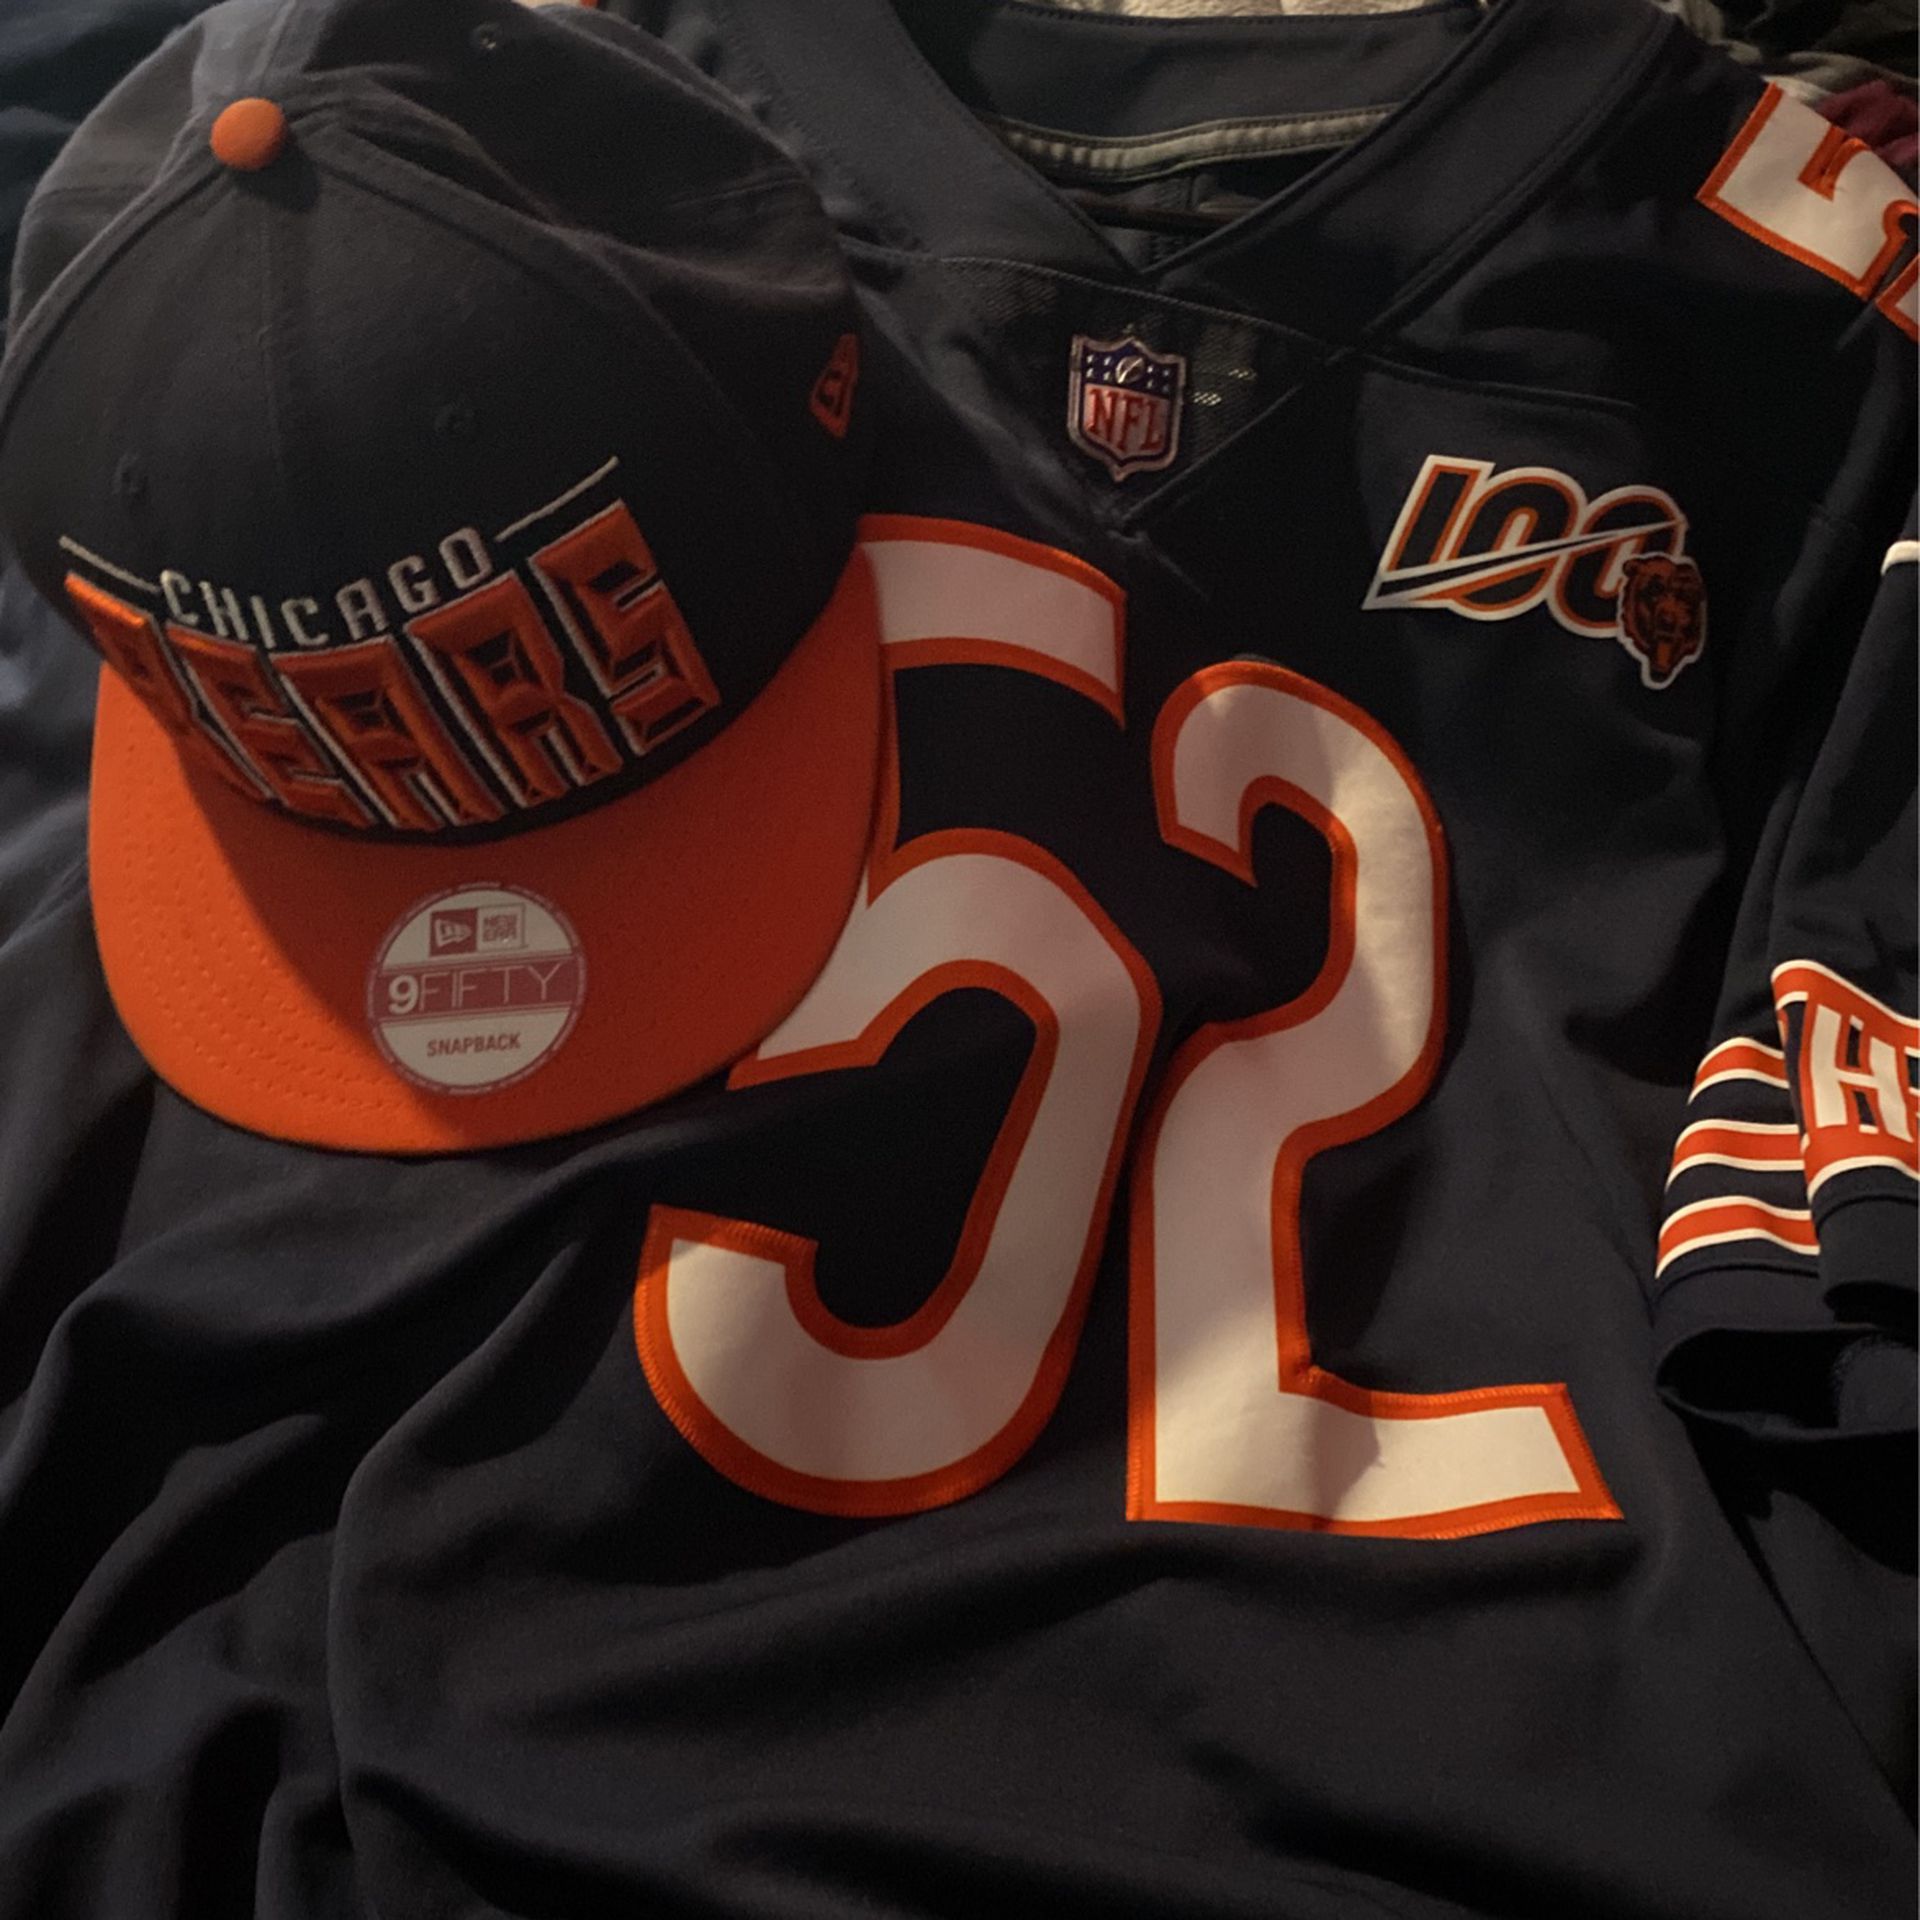 Chicago Bears Hat and a Khalil Maks jersey